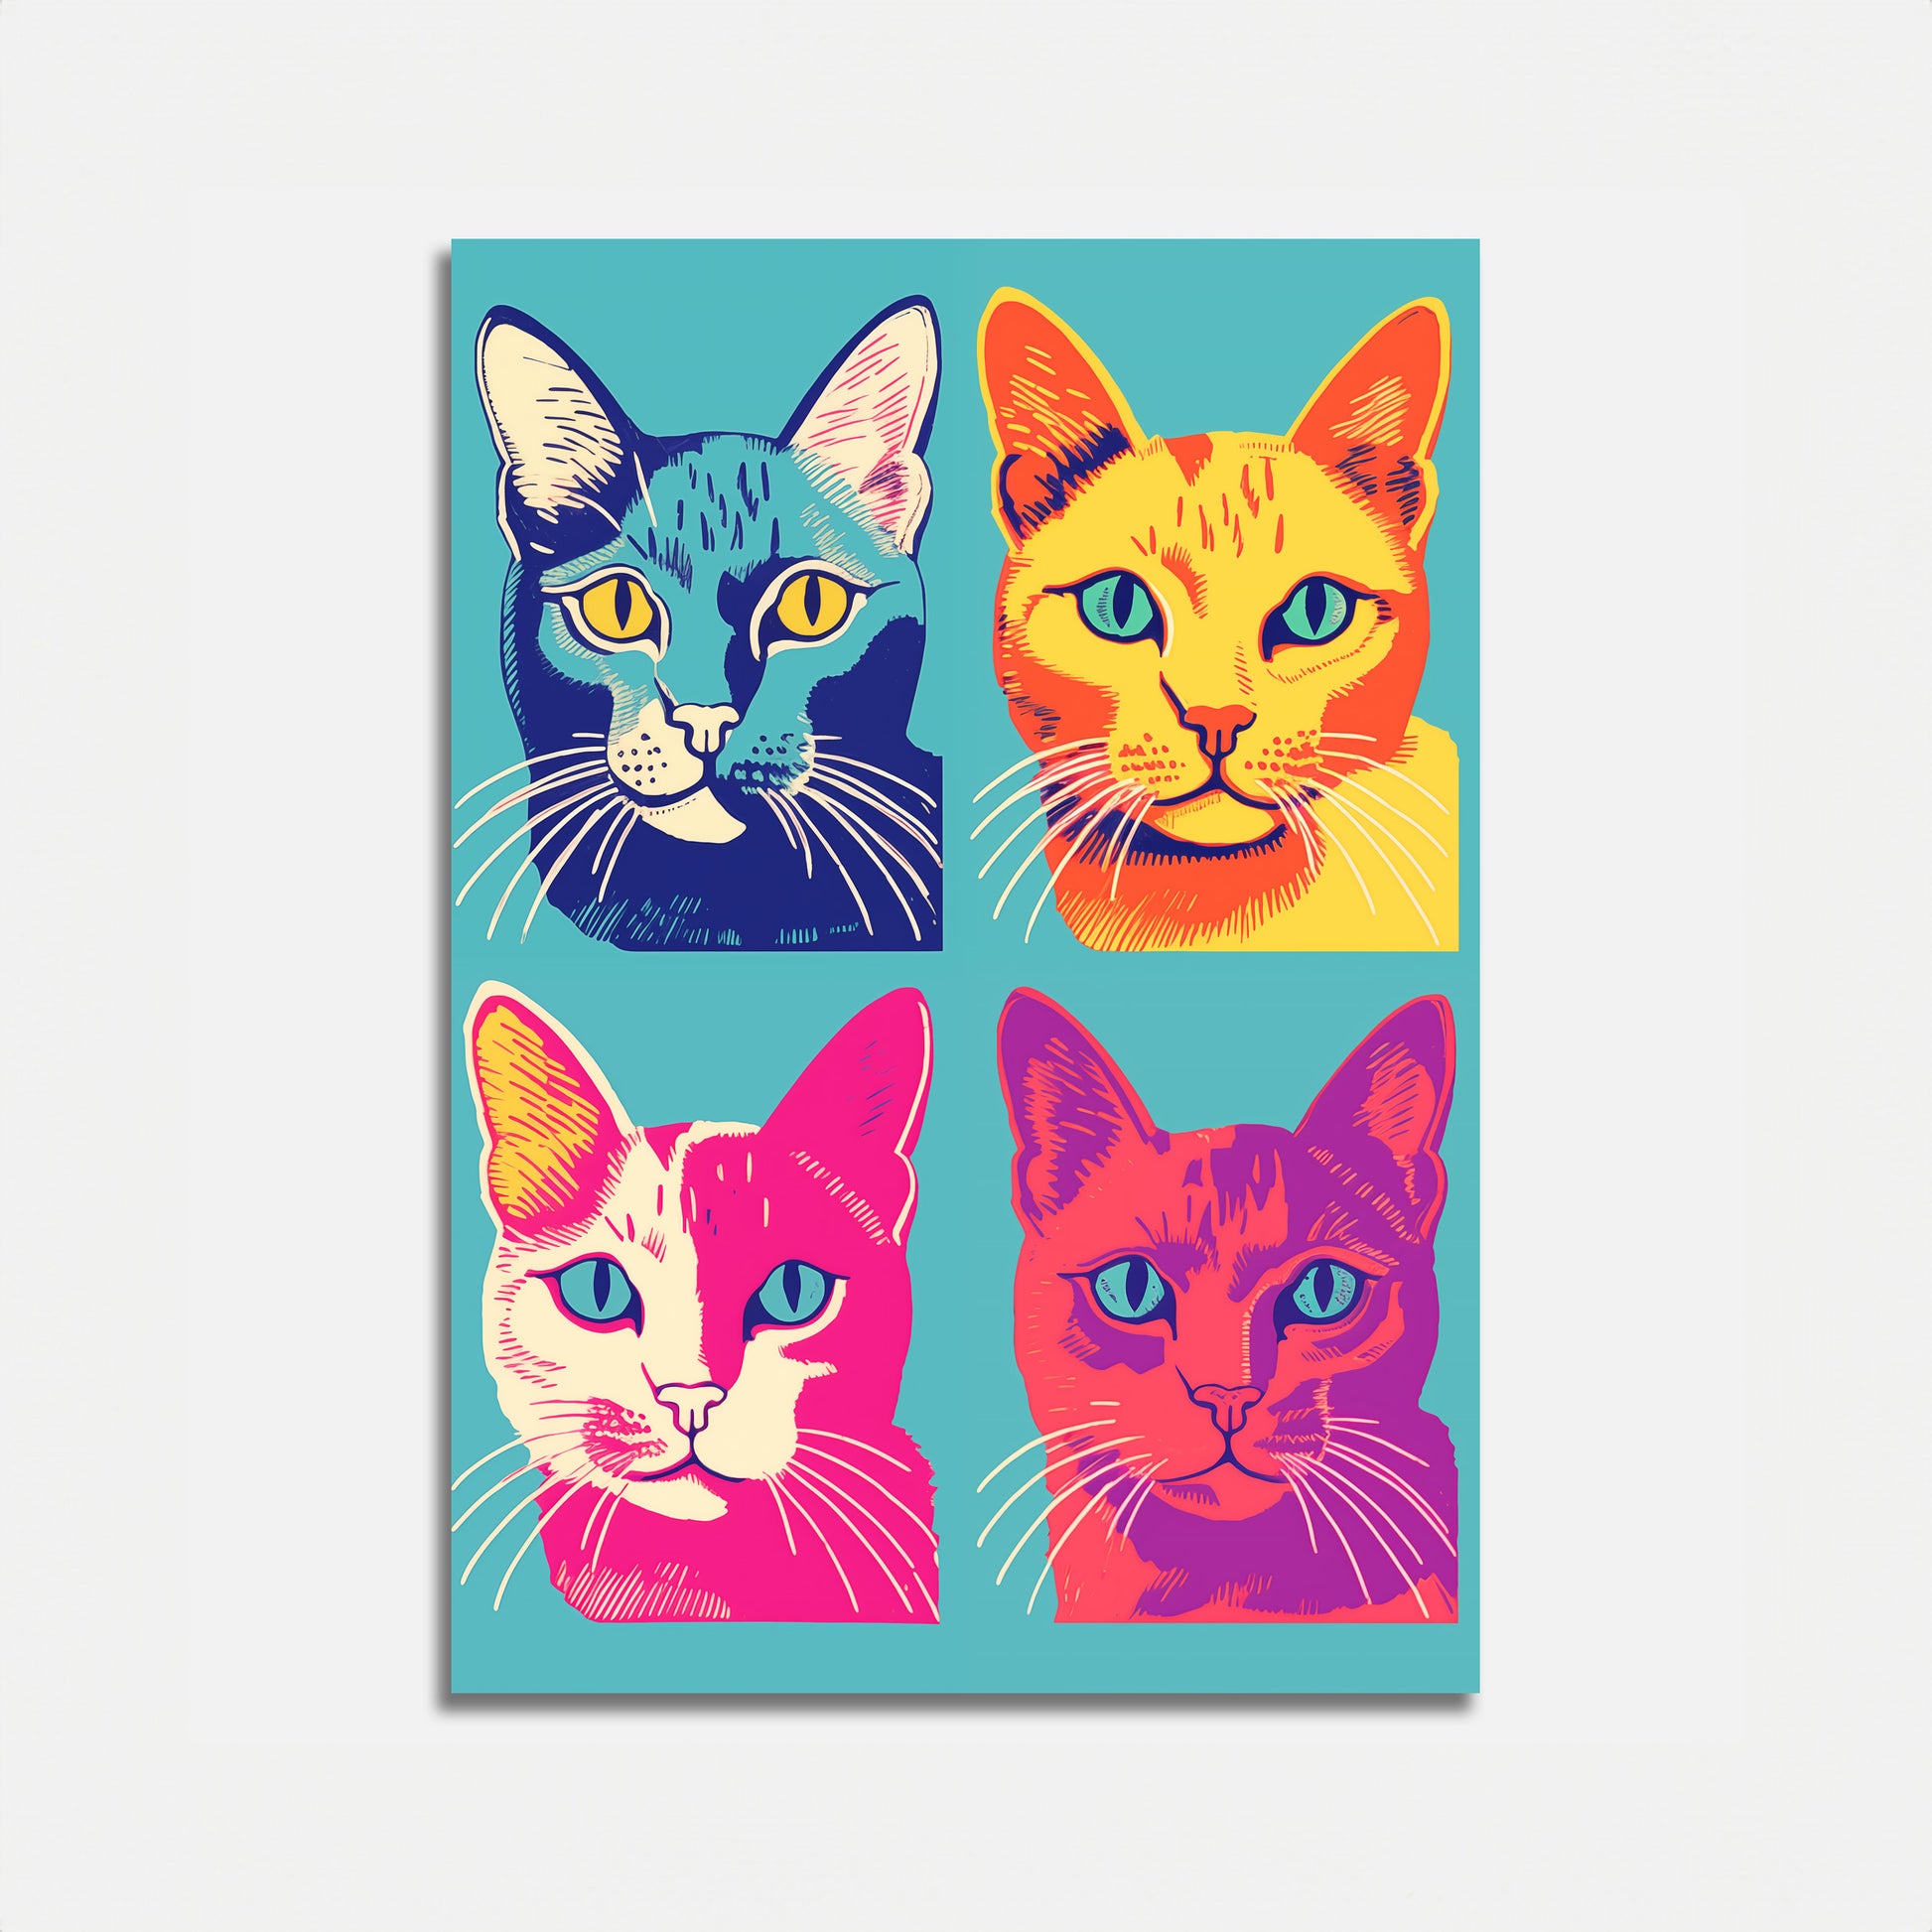 Pop art-style illustration of four colorful cats on a poster.